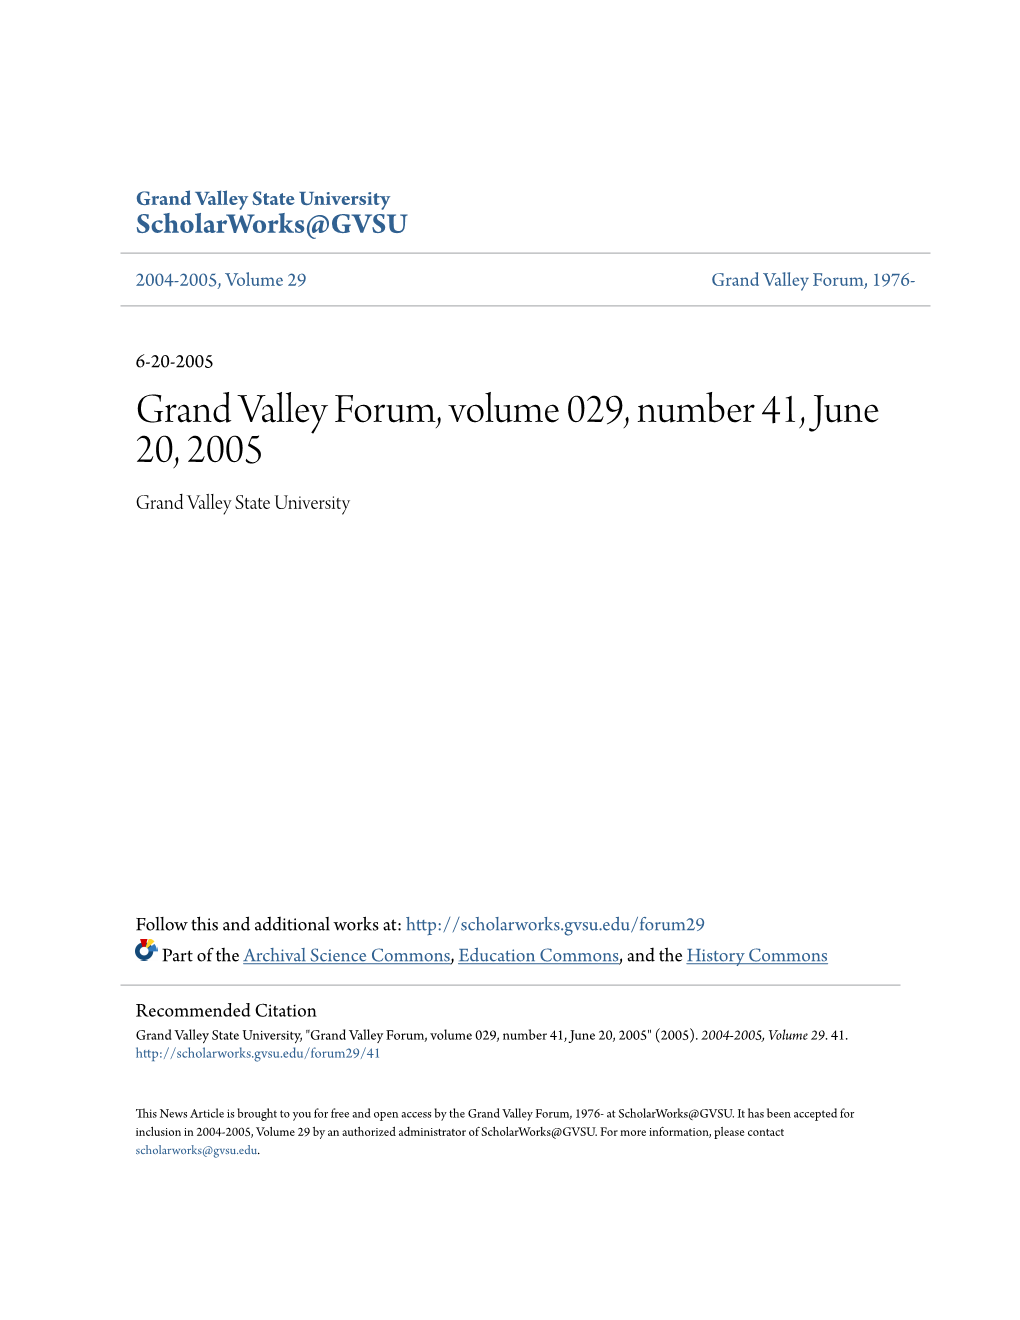 Grand Valley Forum, Volume 029, Number 41, June 20, 2005 Grand Valley State University